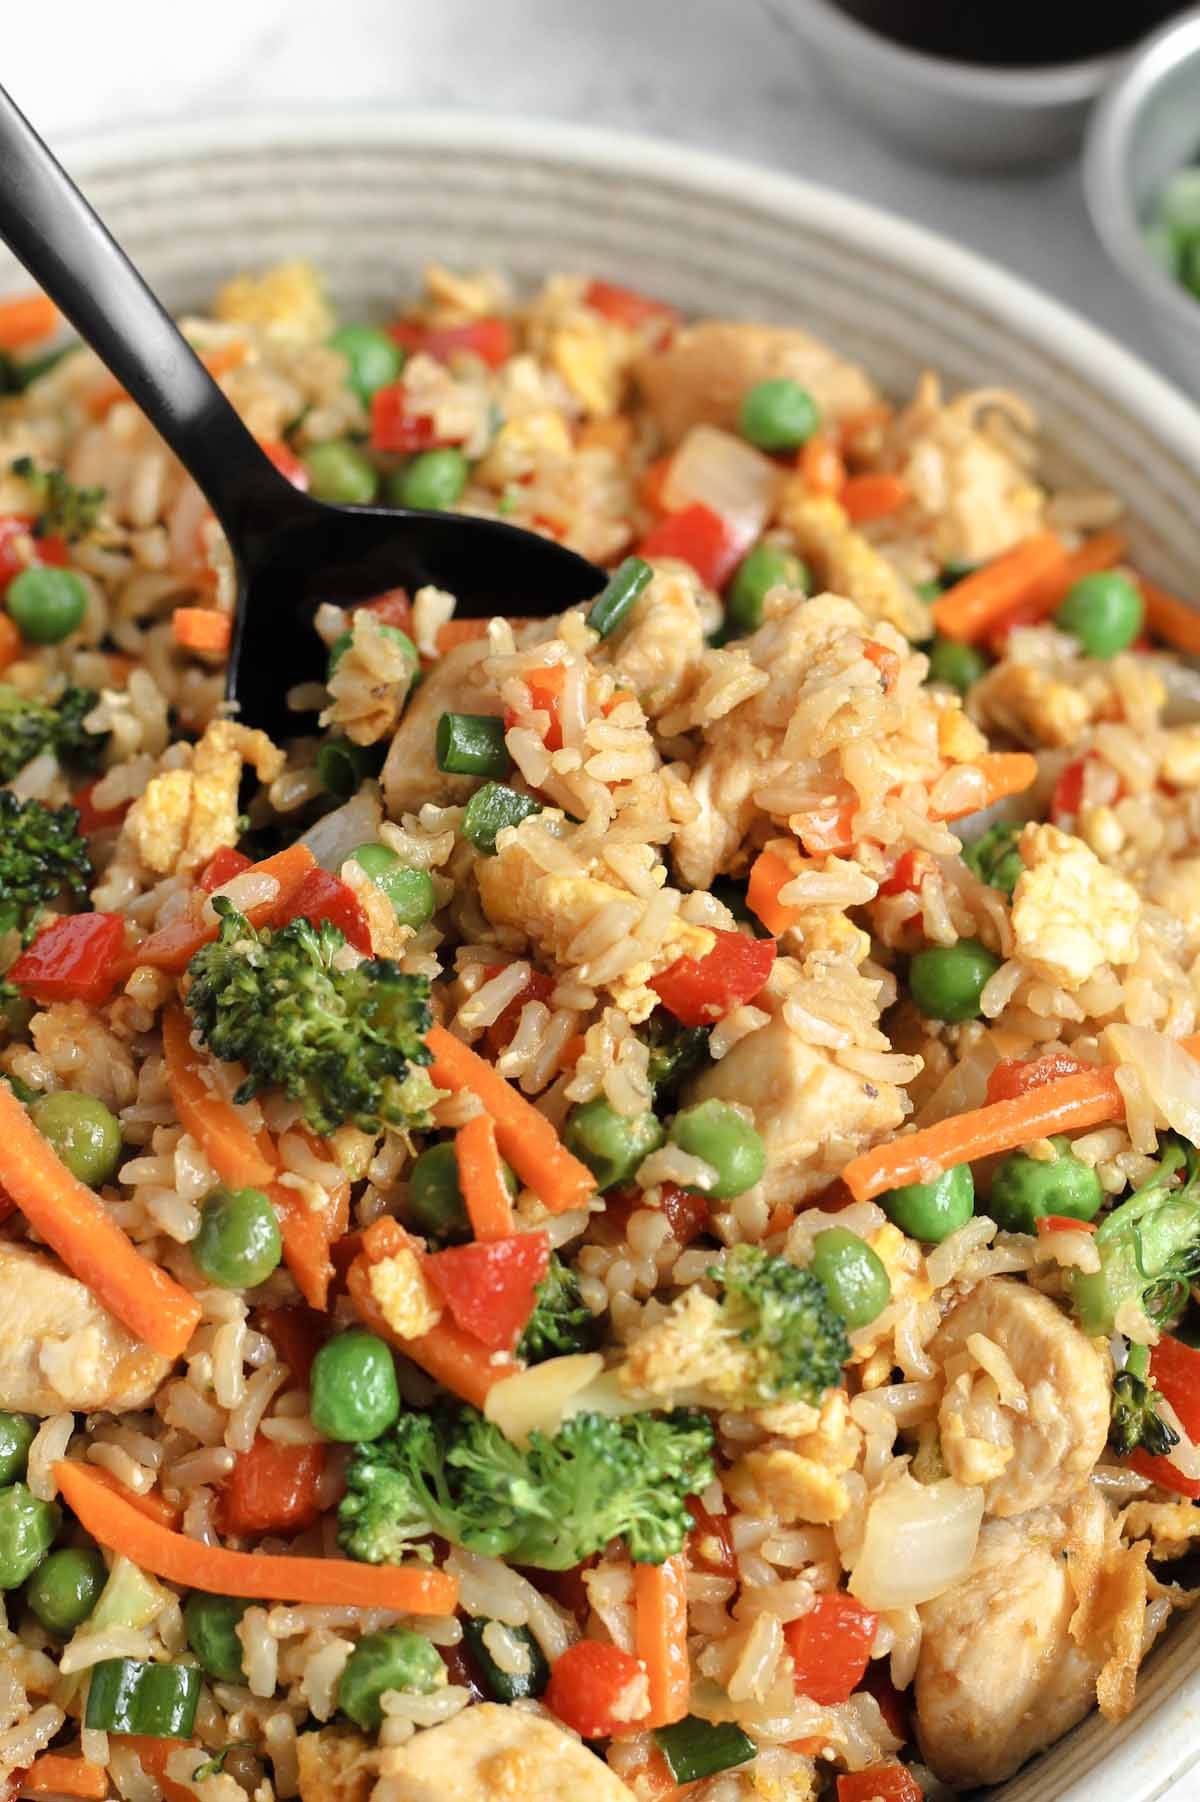 Close-up of a spoon scooping healthy fried rice from a serving bowl.